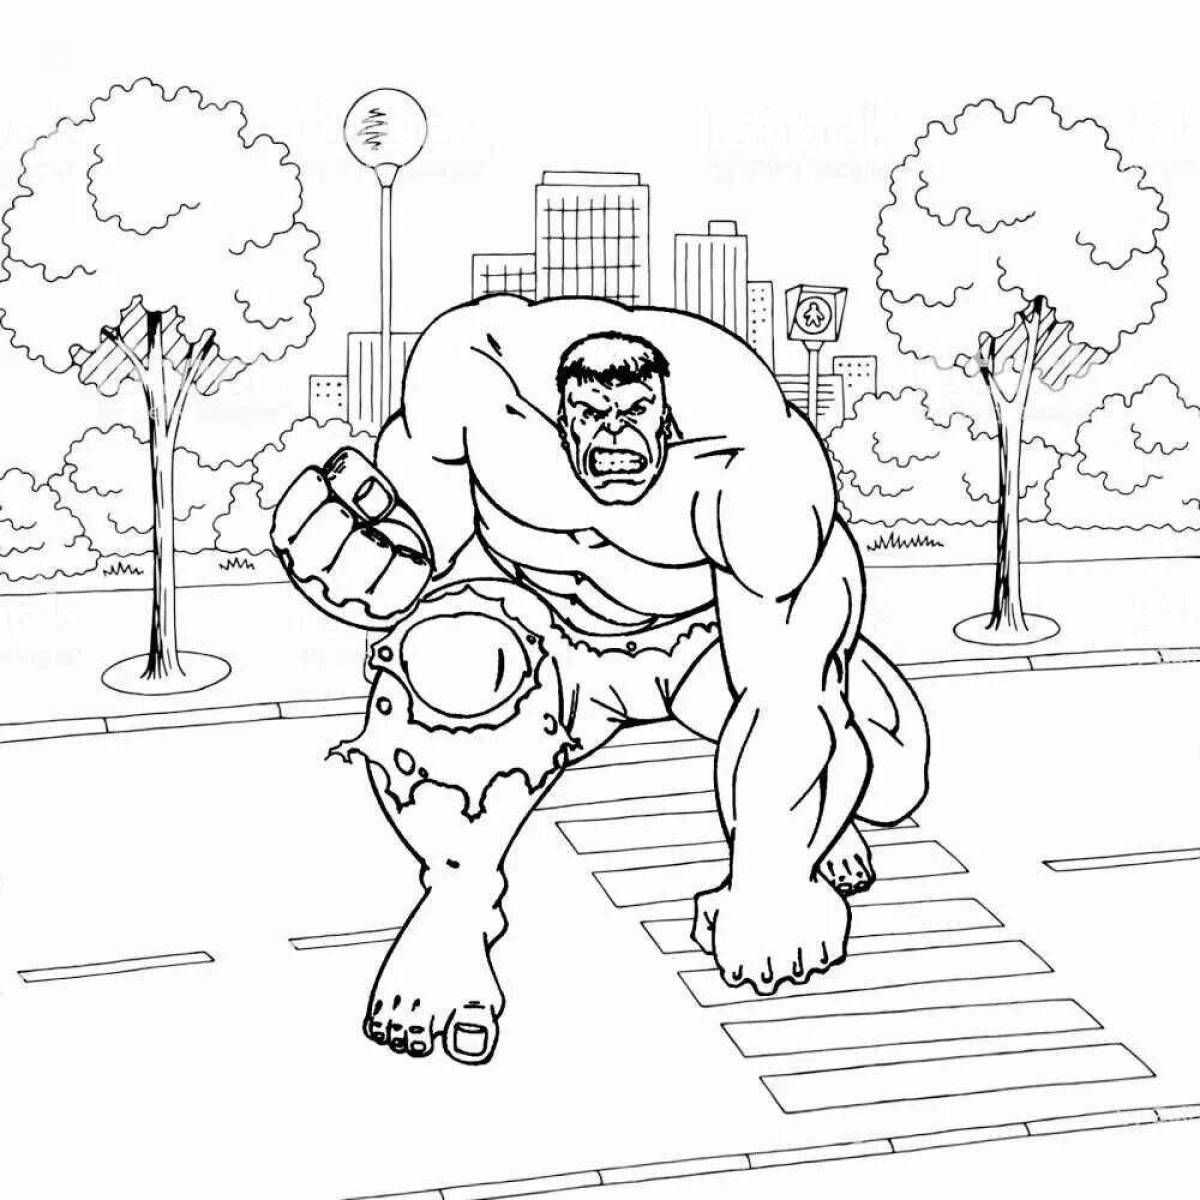 Fun Hulk coloring book for 6-7 year olds